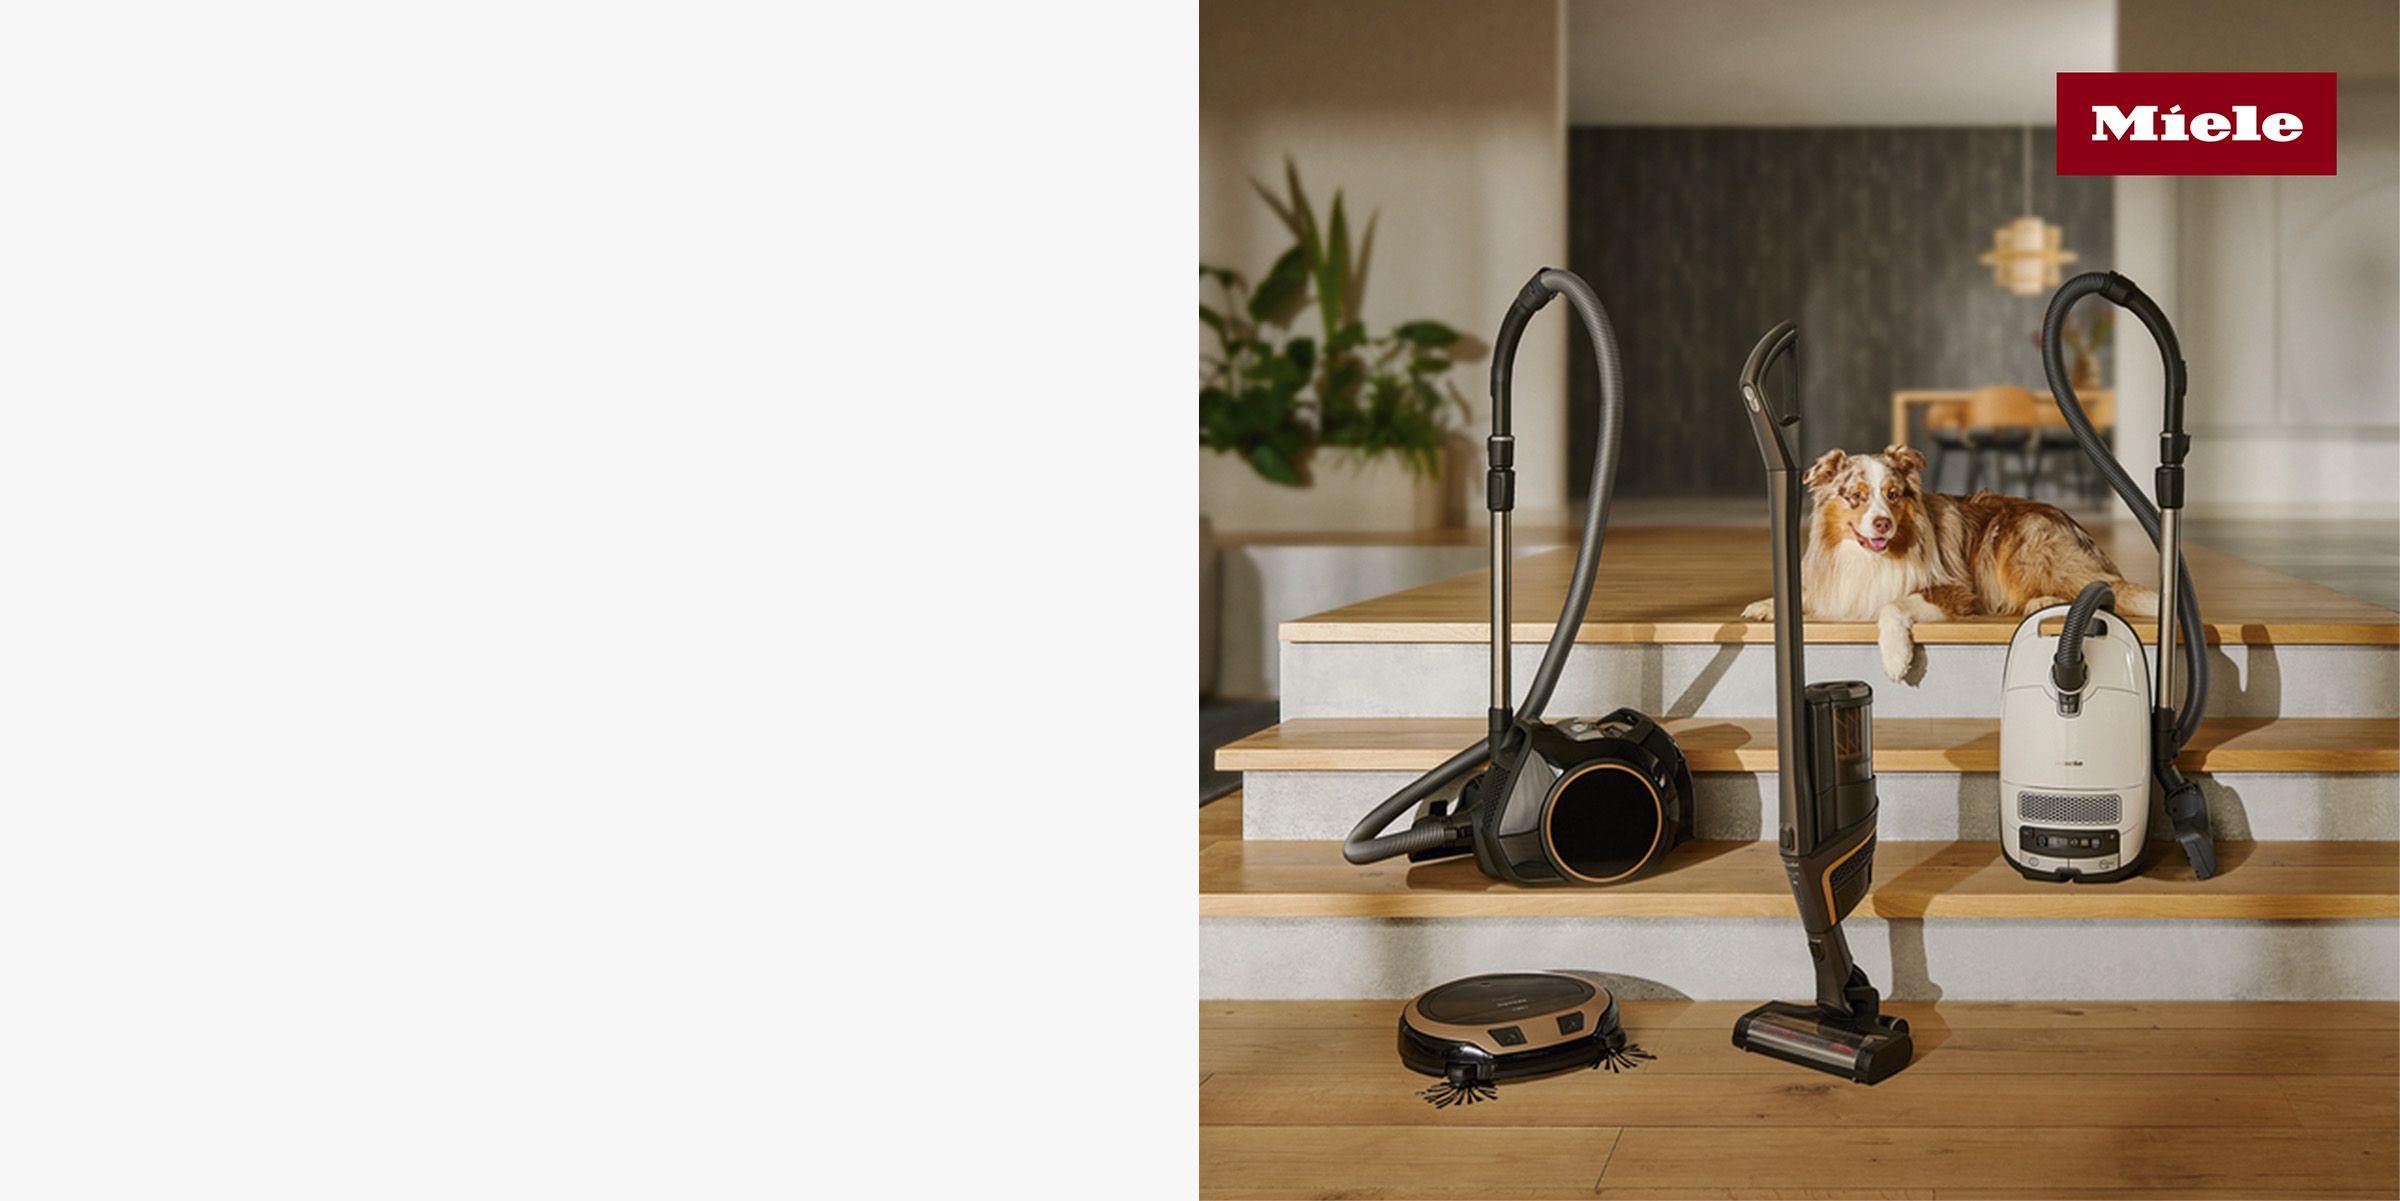 There’s a Miele for every home Save up to £150 on powerful cleaning solutions as diverse as the homes we live in